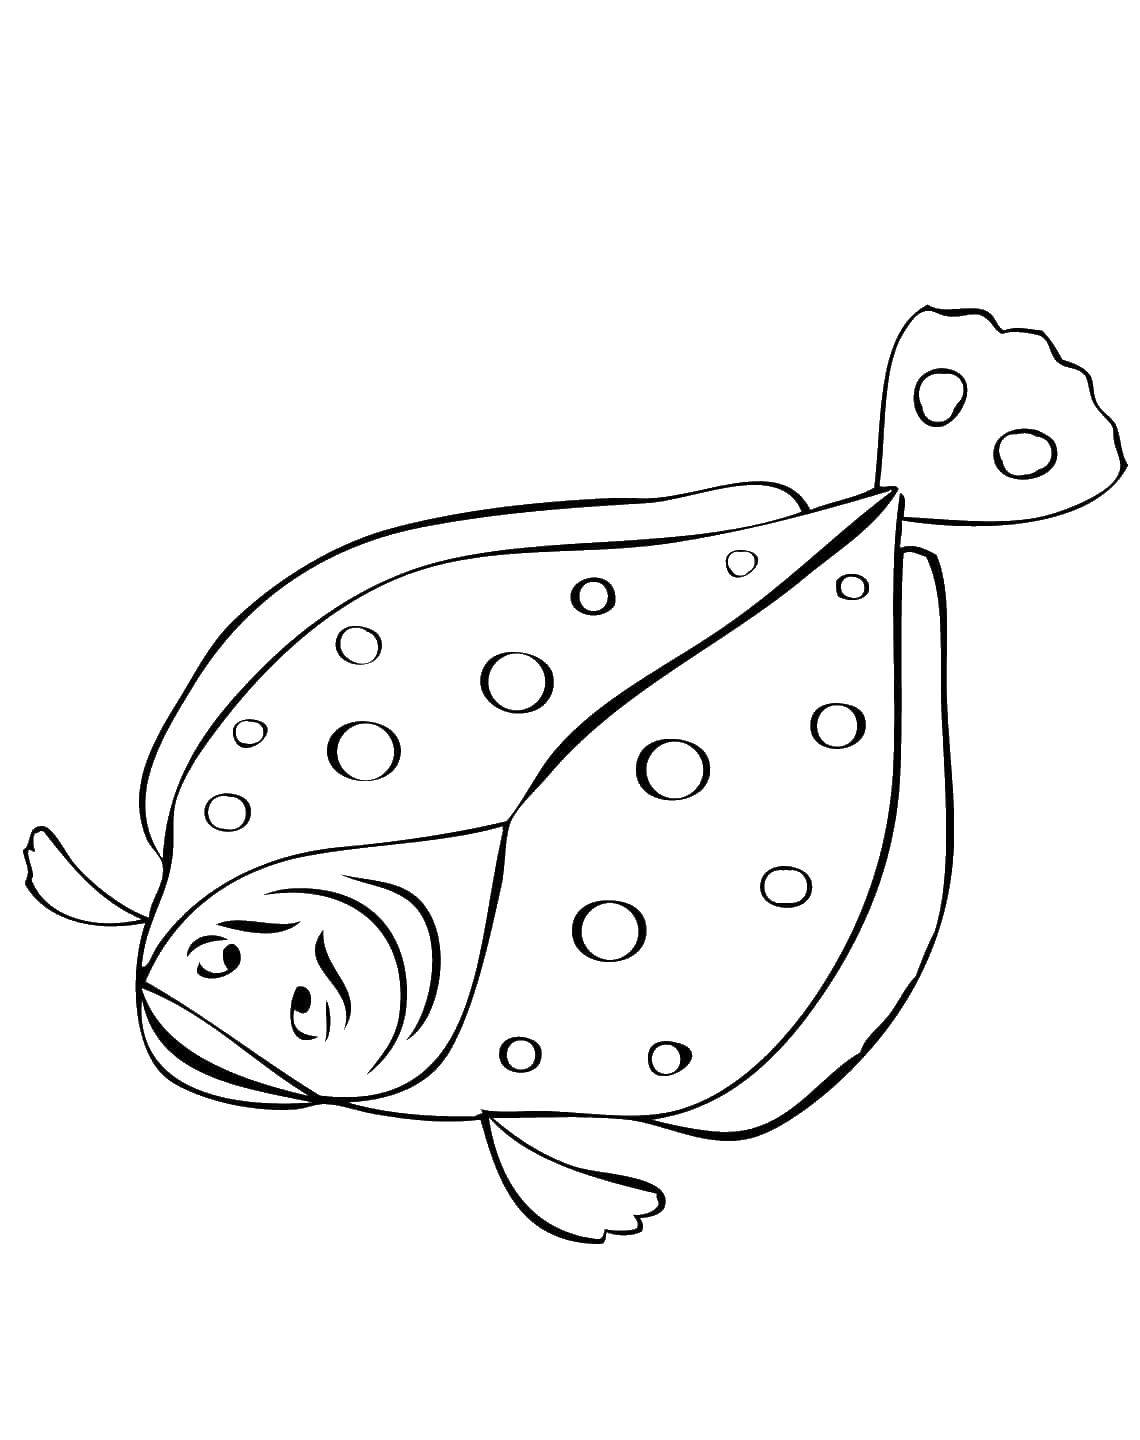 Coloring Flounder. Category coloring. Tags:  Underwater world, fish.